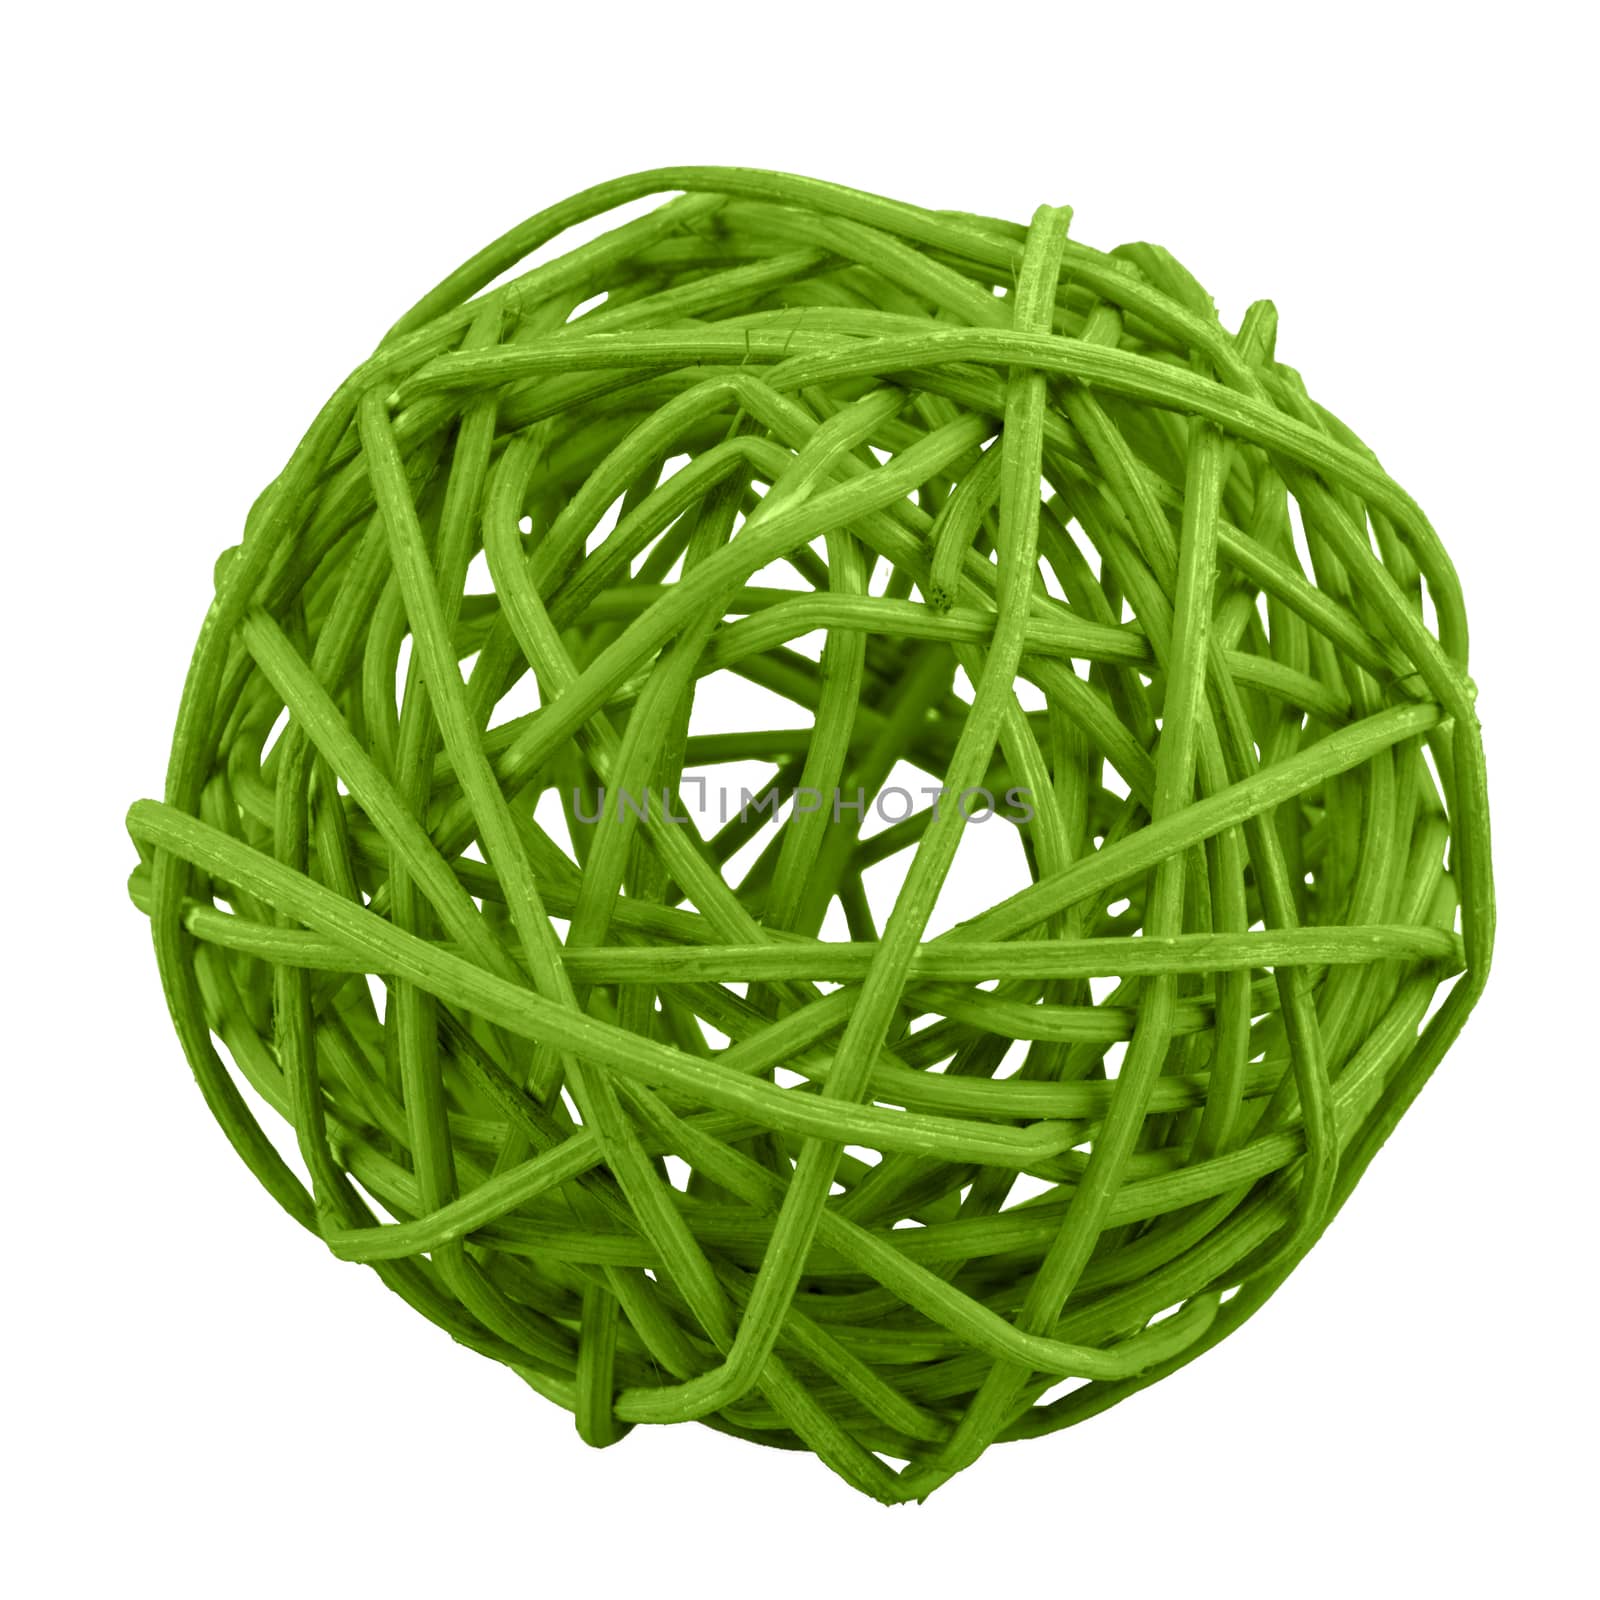 Green wicker ball isolated on a white background